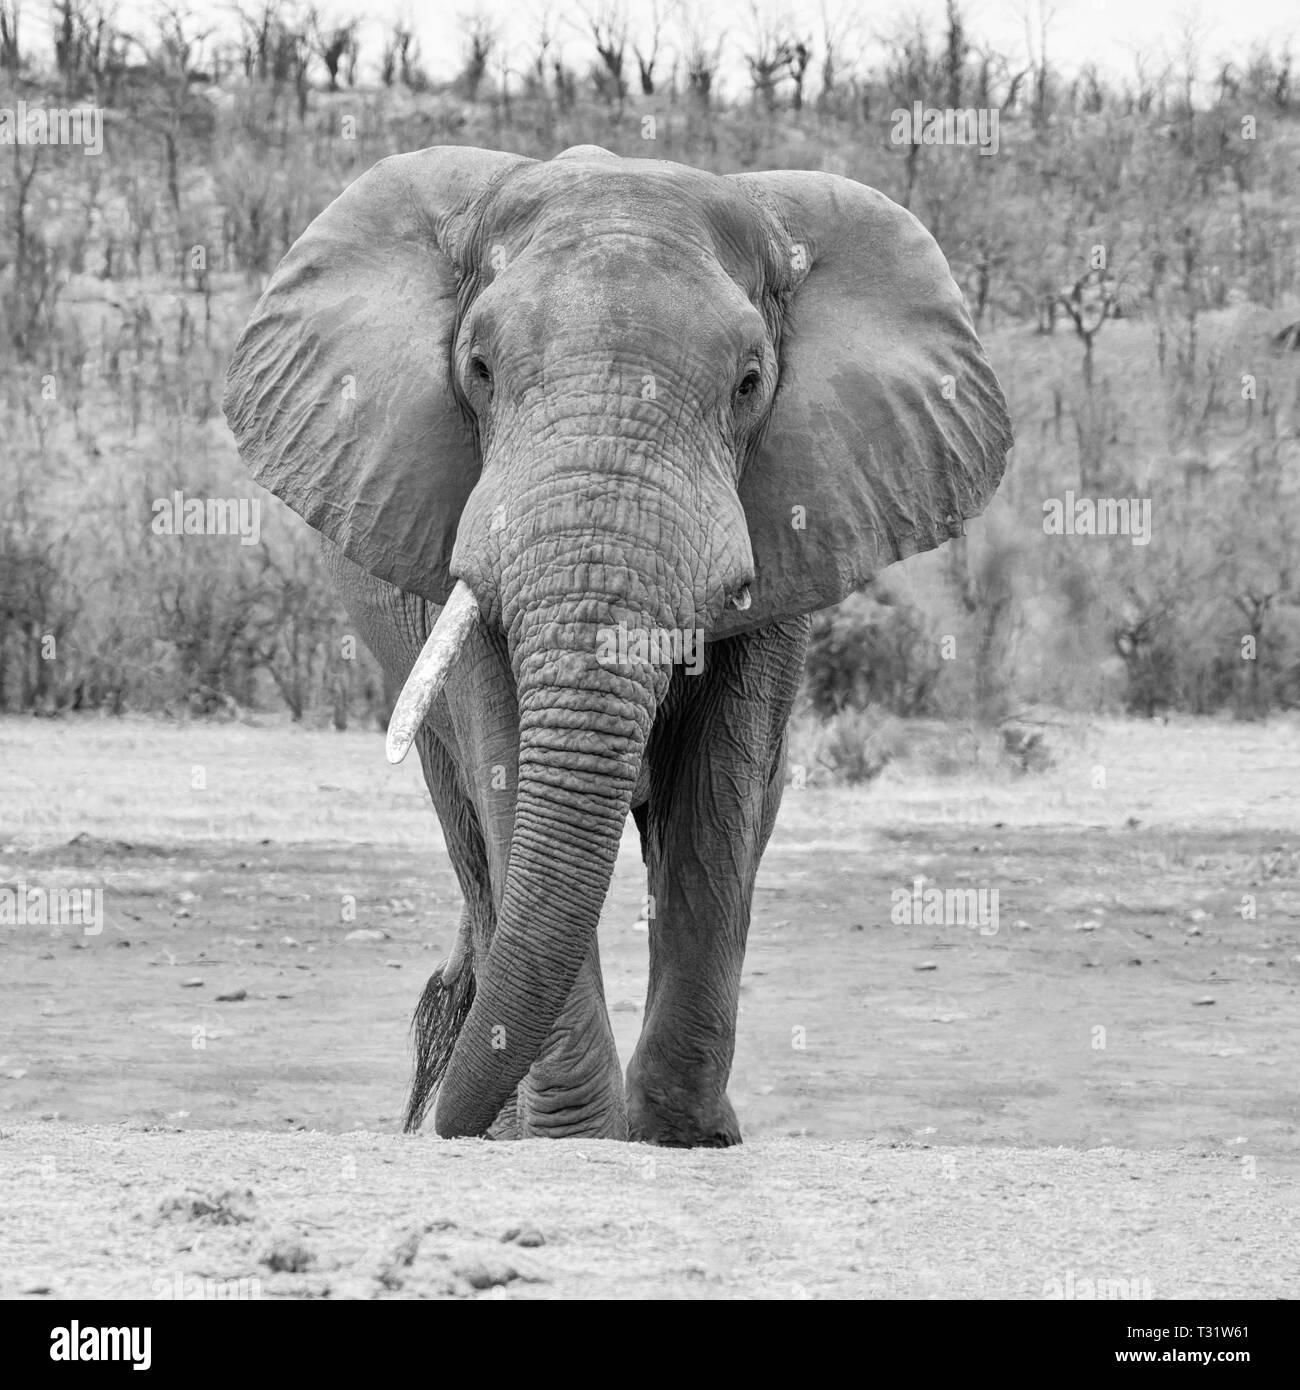 An African Elephant bull in Southern African savanna Stock Photo